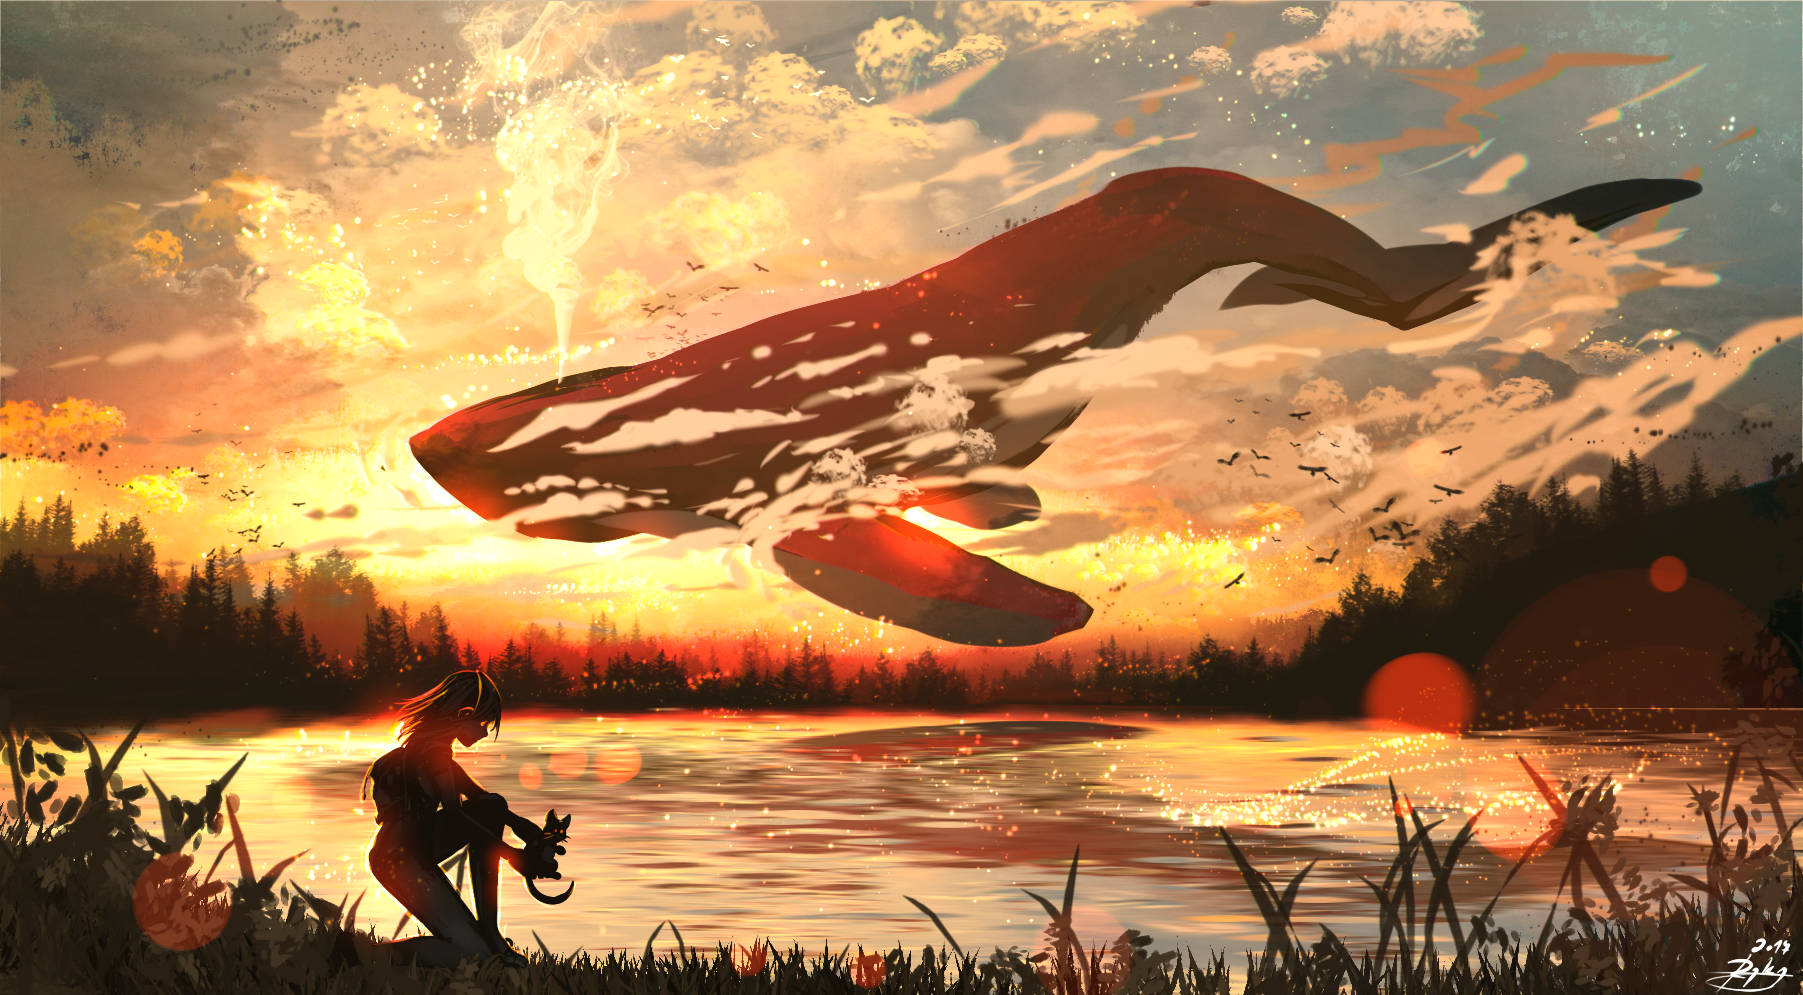 General 1803x995 landscape sunset fantasy art whale digital art watermarked outdoors lake clouds